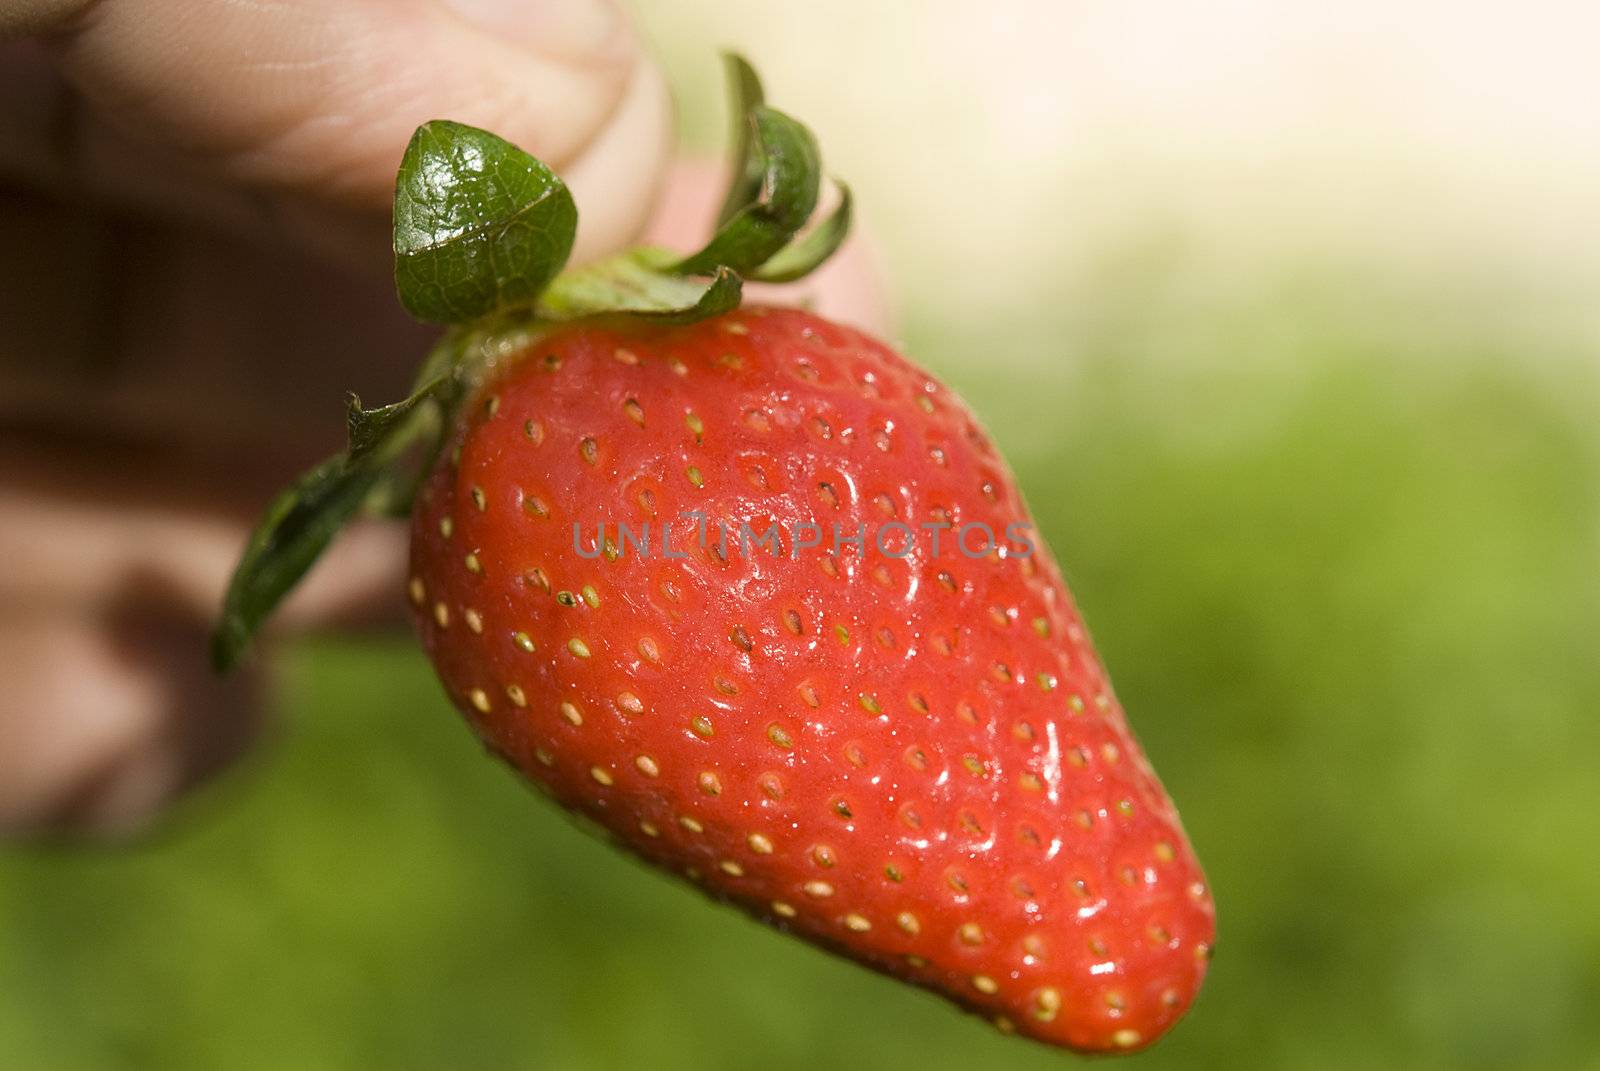 	
Man holding fingers for one twig strawberries
